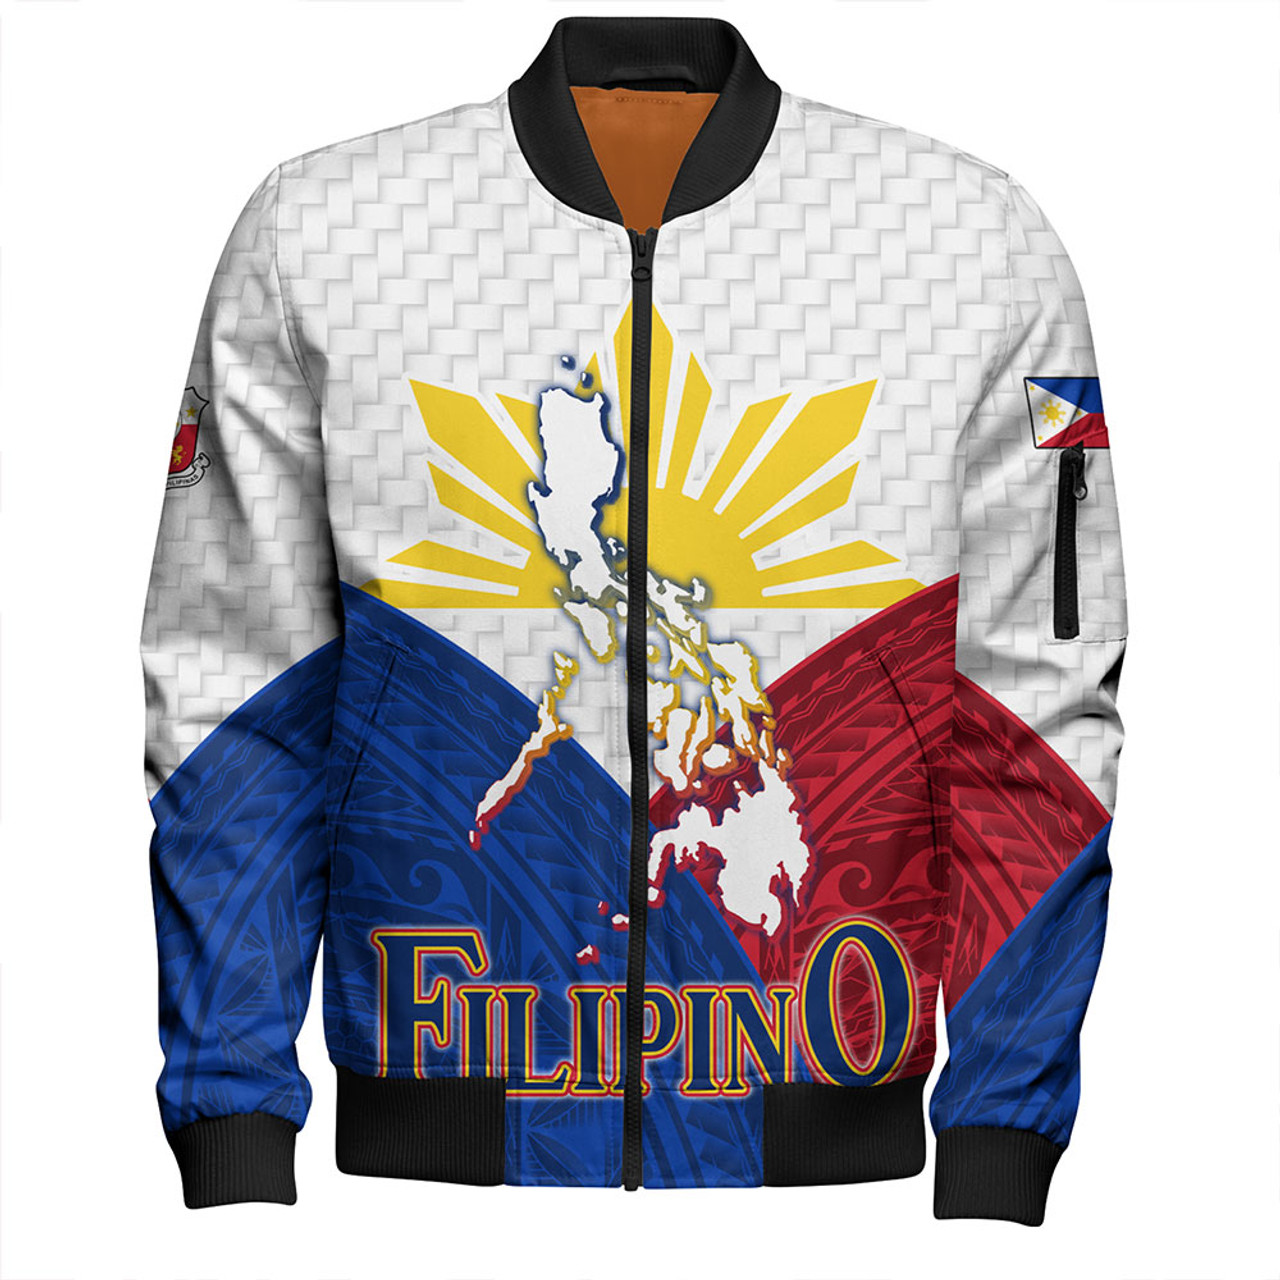 Philippines Bomber Jacket - Philippines National Bird With Sun And Stars Style